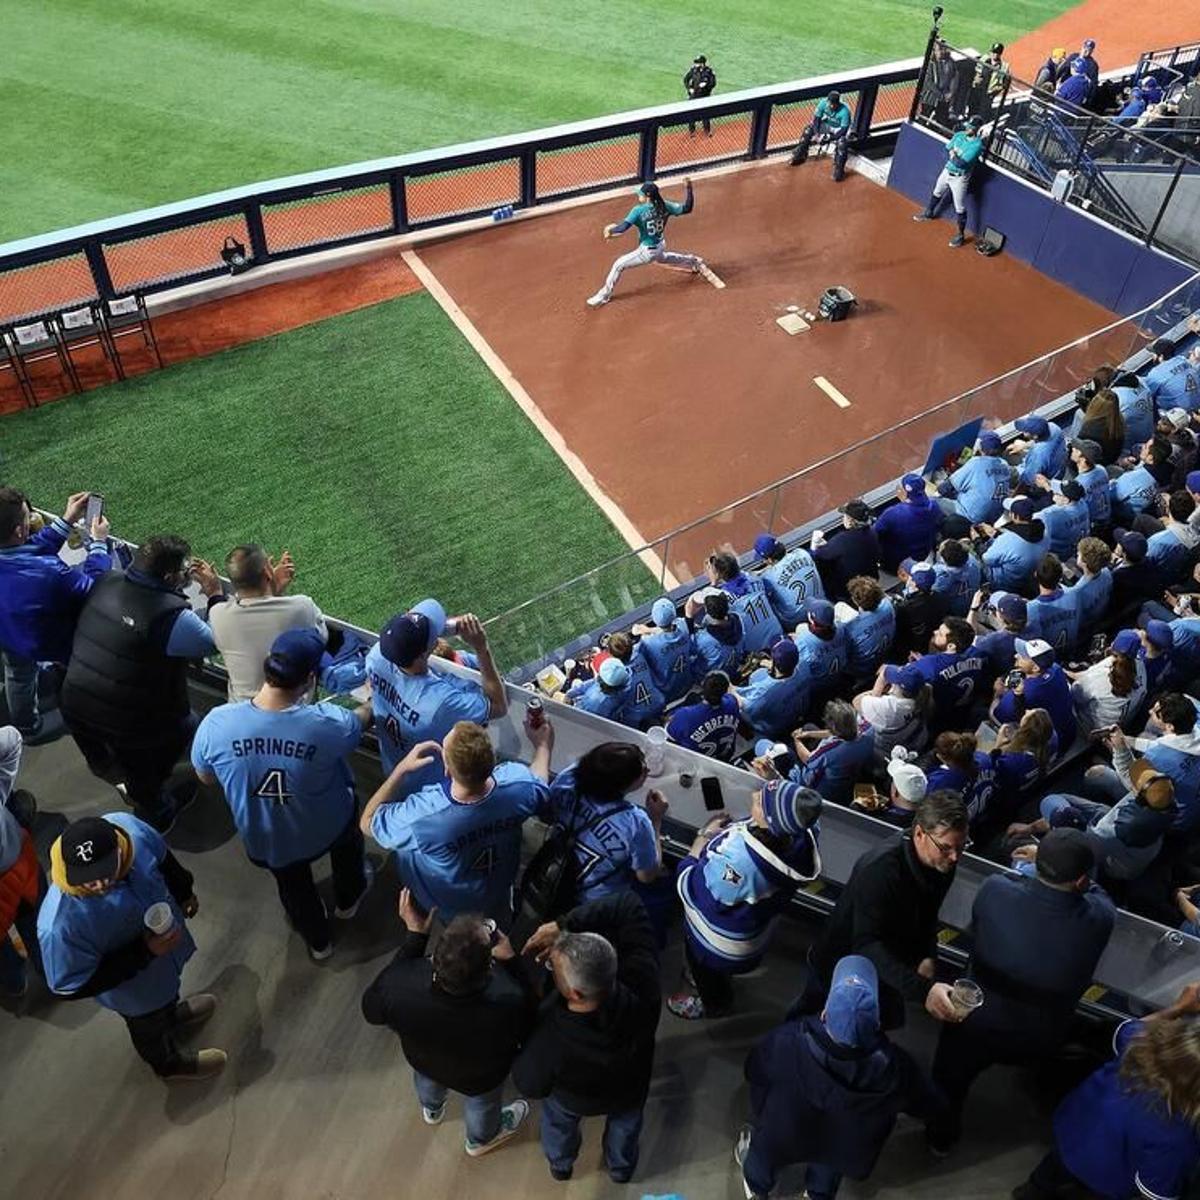 It would be nice if the Blue Jays had an area at the Rogers Centre  dedicated to their history where fans could interact and take pictures of  the two World Series trophies